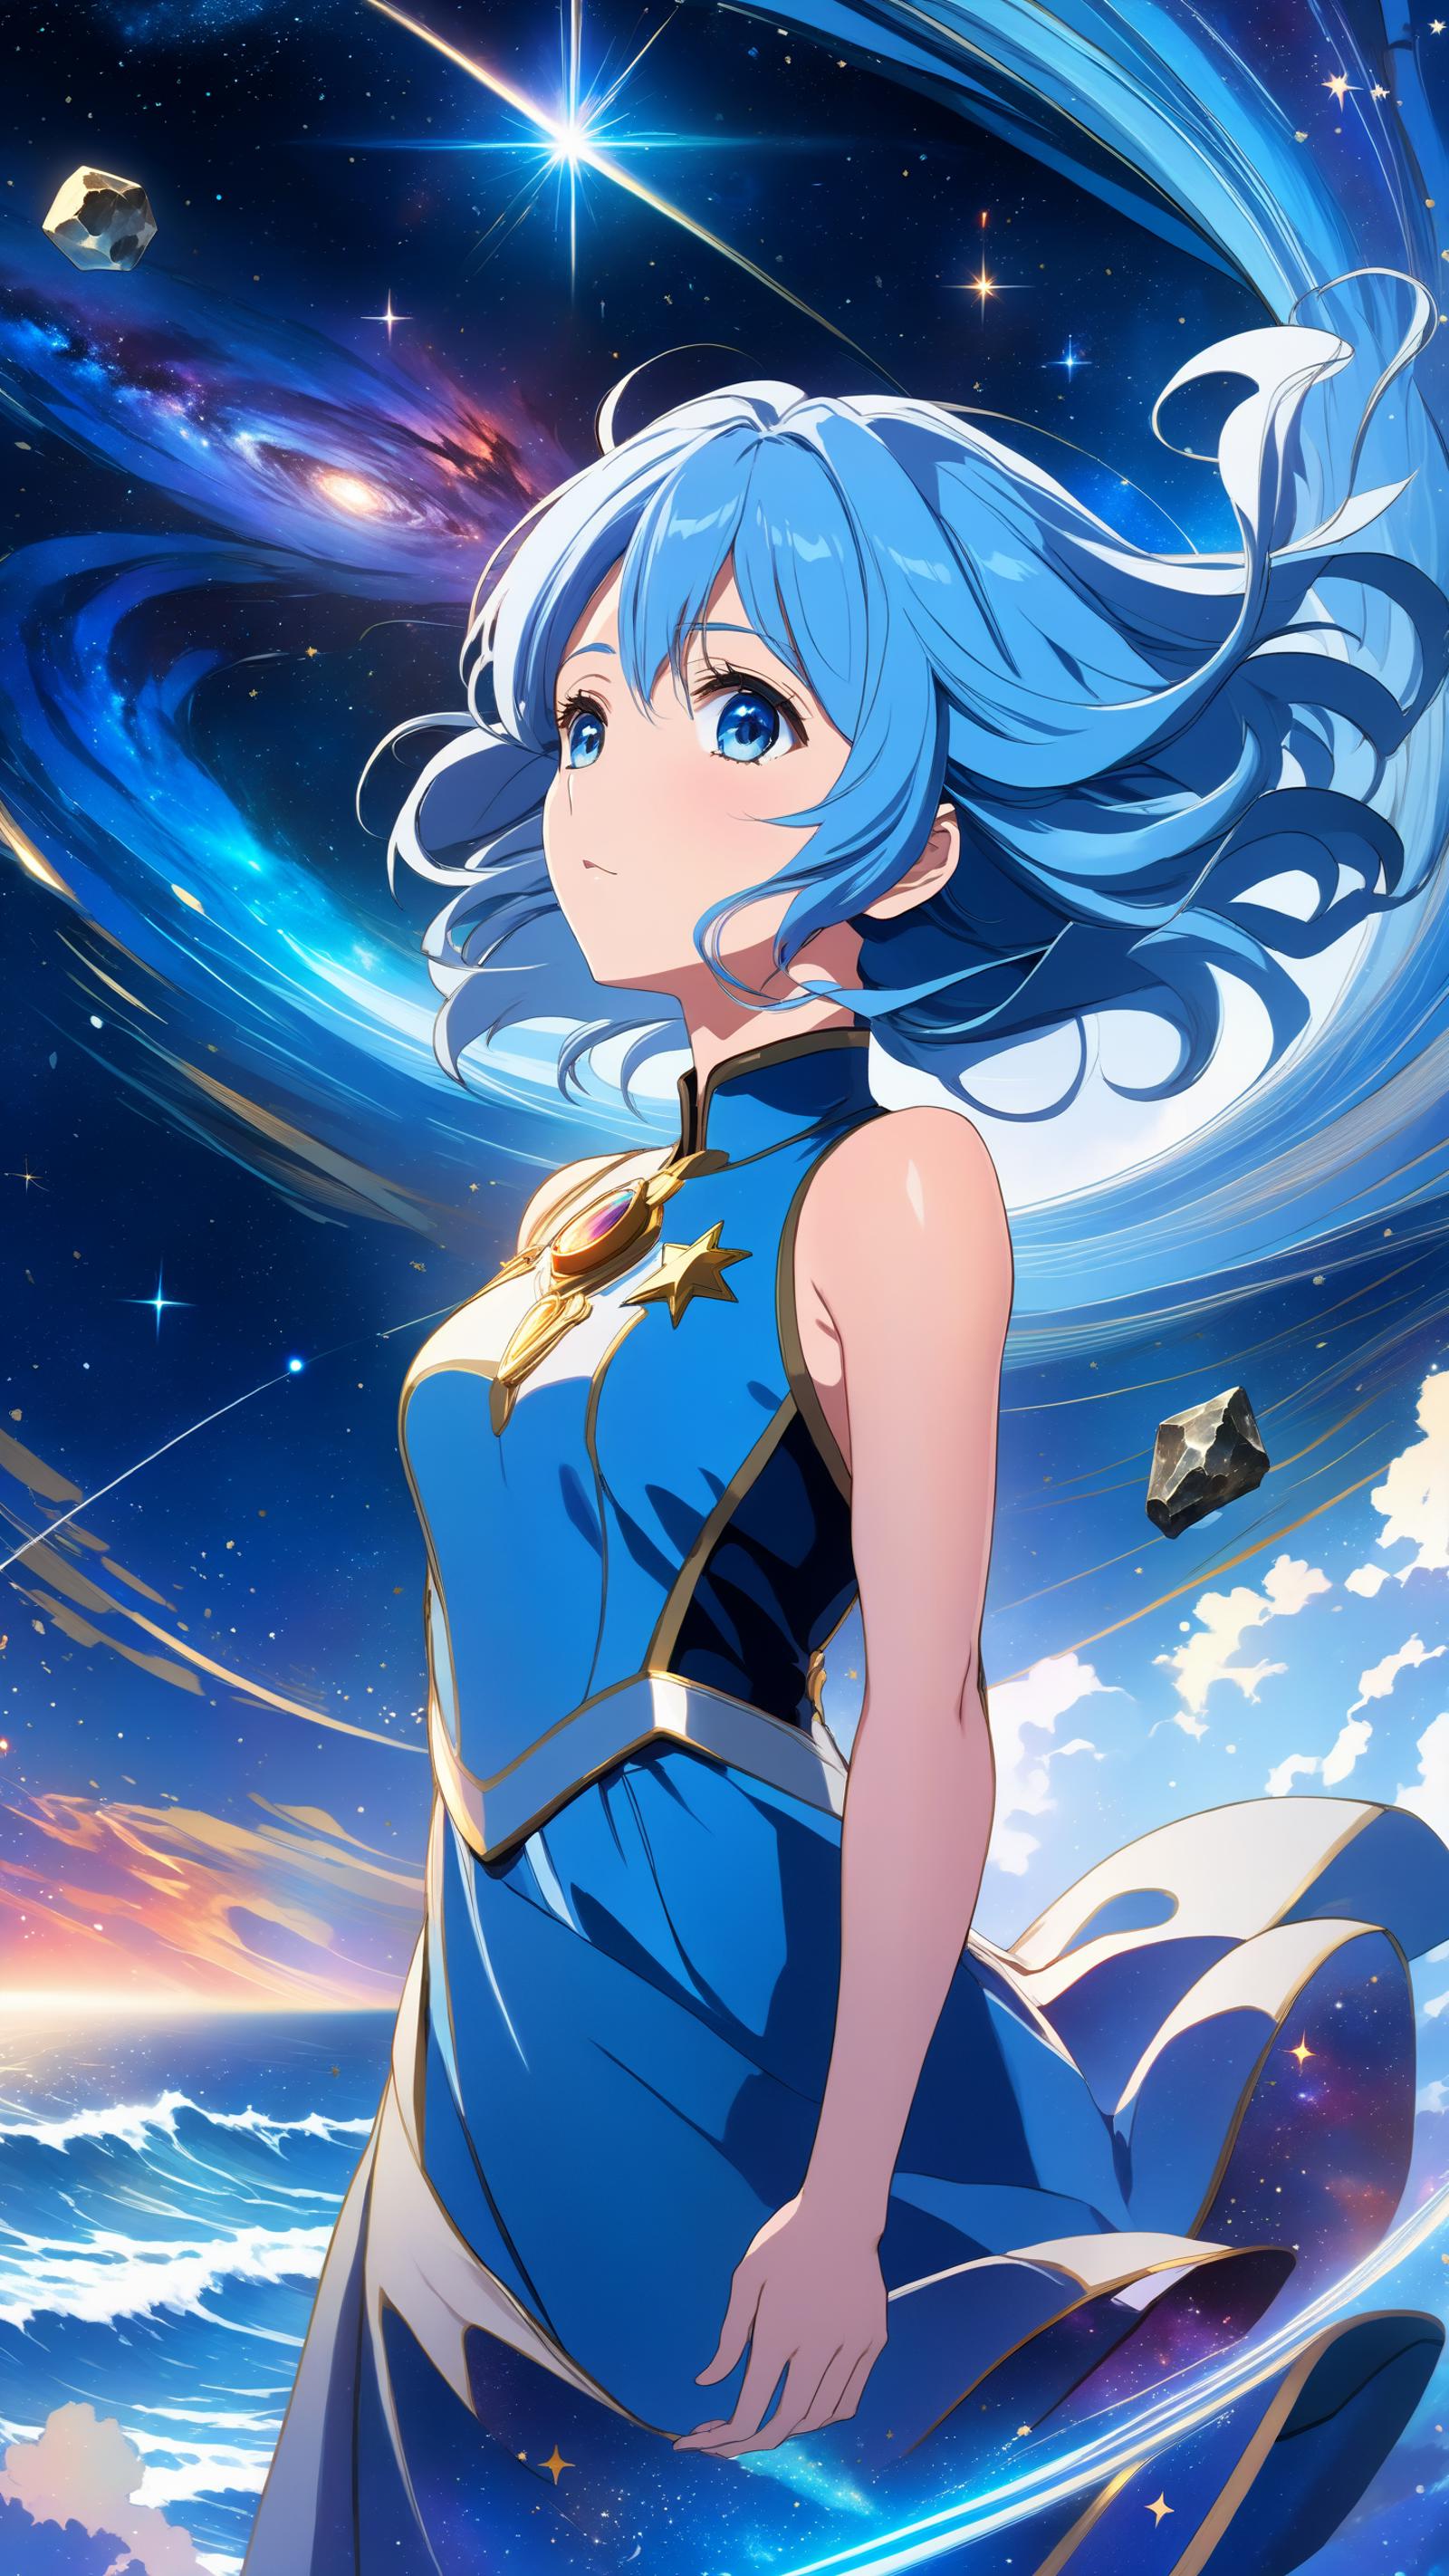 A blue-haired anime girl with a star on her neck stands against a blue and white background.